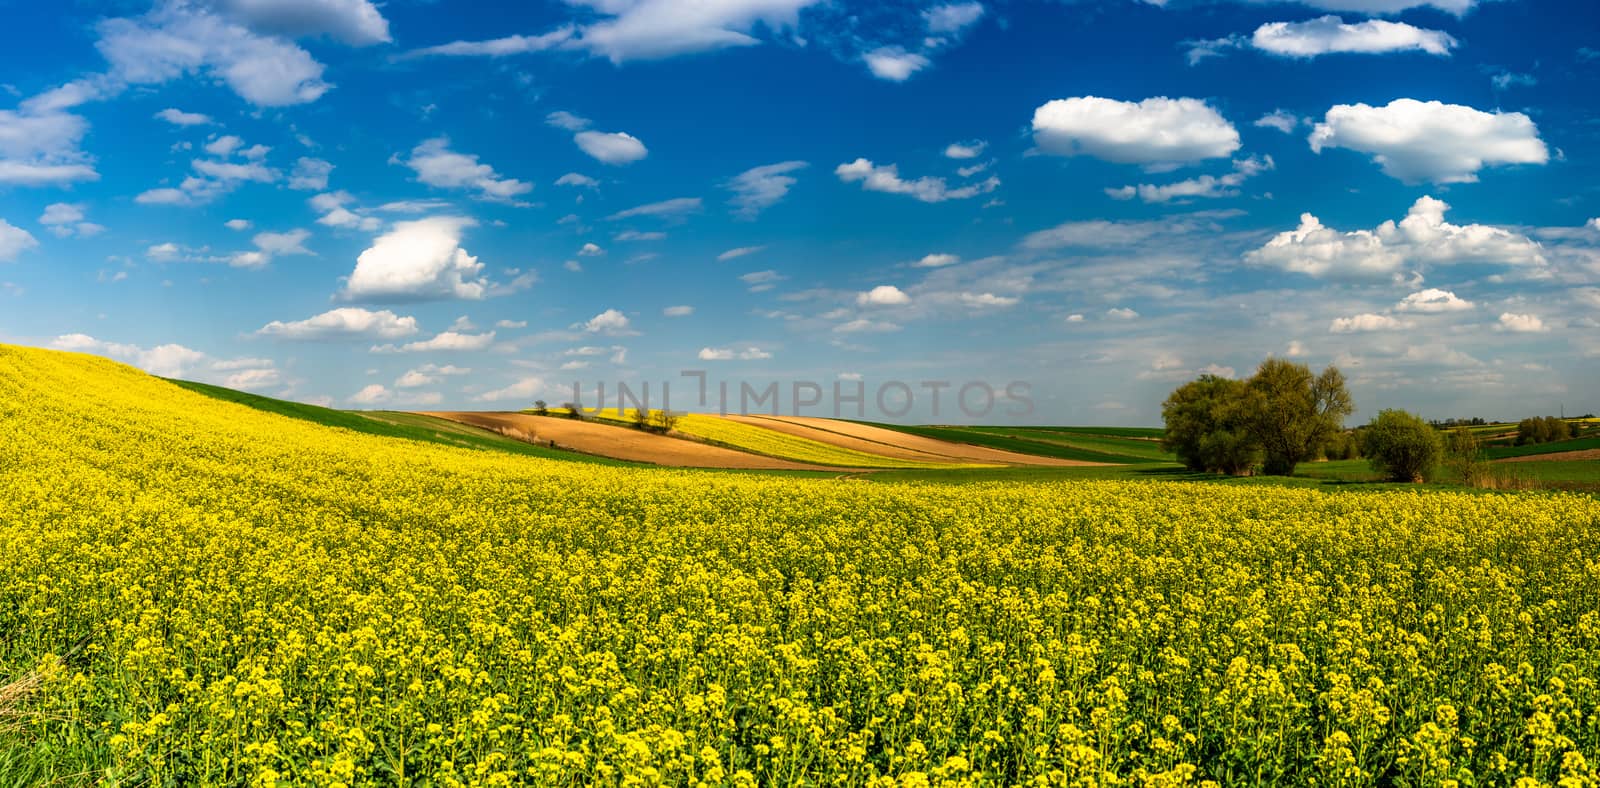 Panoramic Image or Picturesque Countryside. Canola or Rape Field by merc67